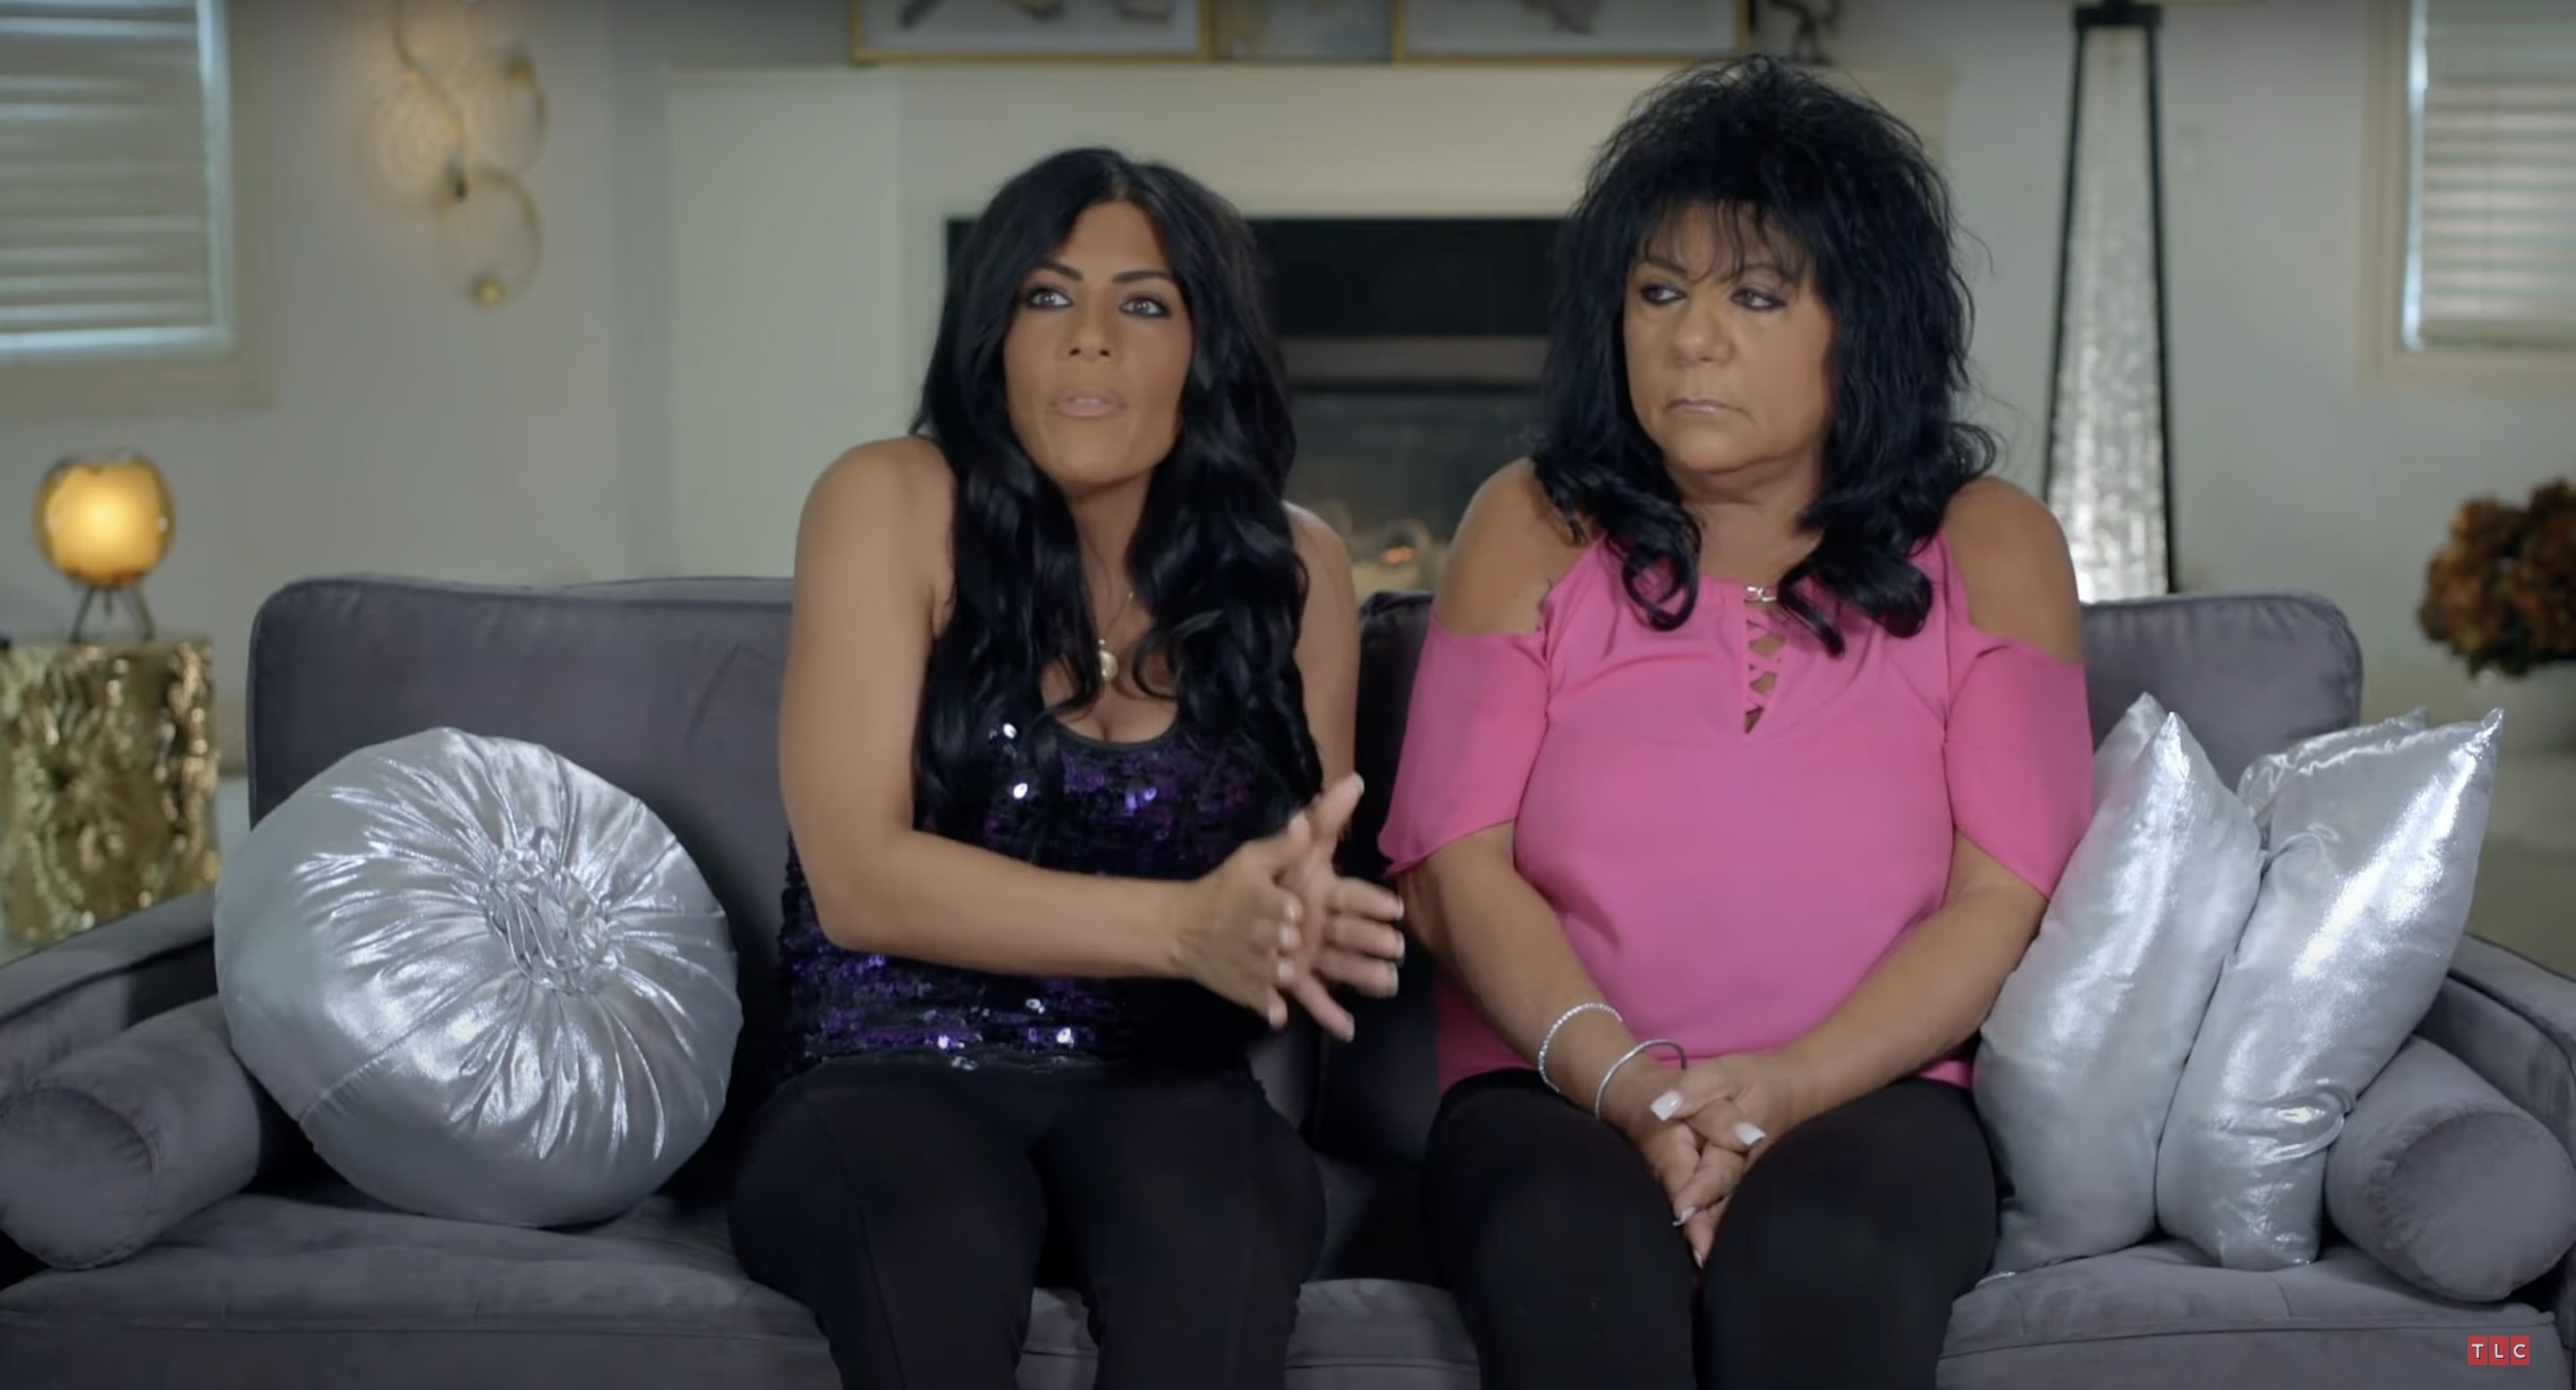 TLC's 'sMothered' cast: Meet the mothers and daughters